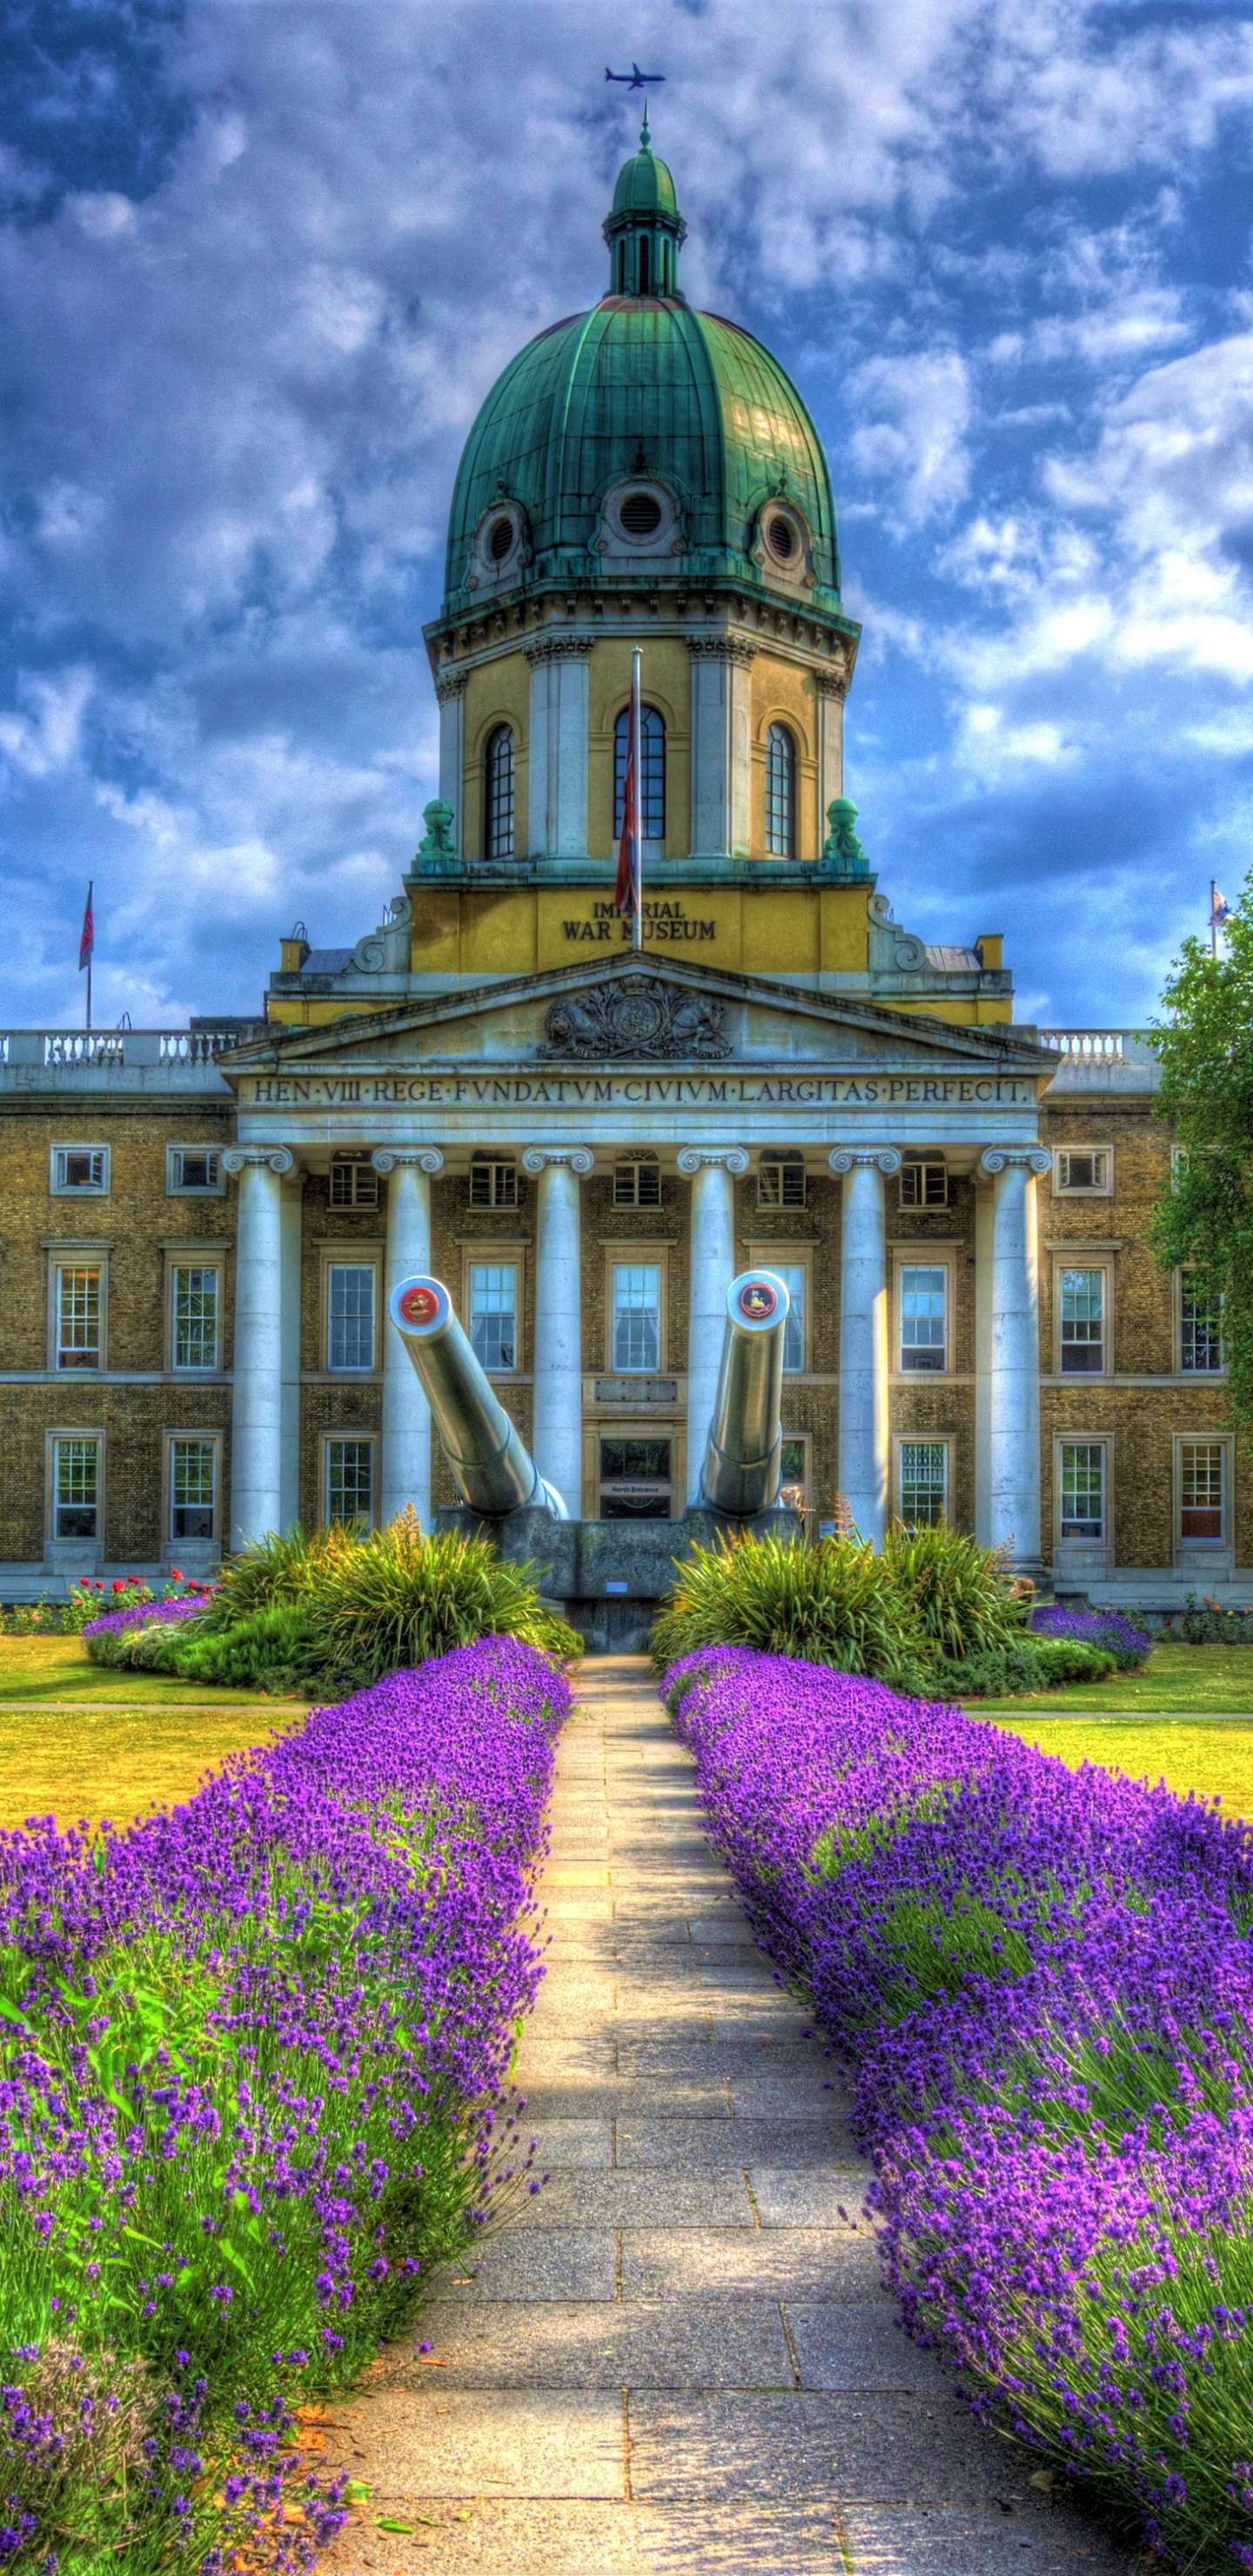 garden, man made, museum, spring, purple flower, hdr, impegrial war museum, building